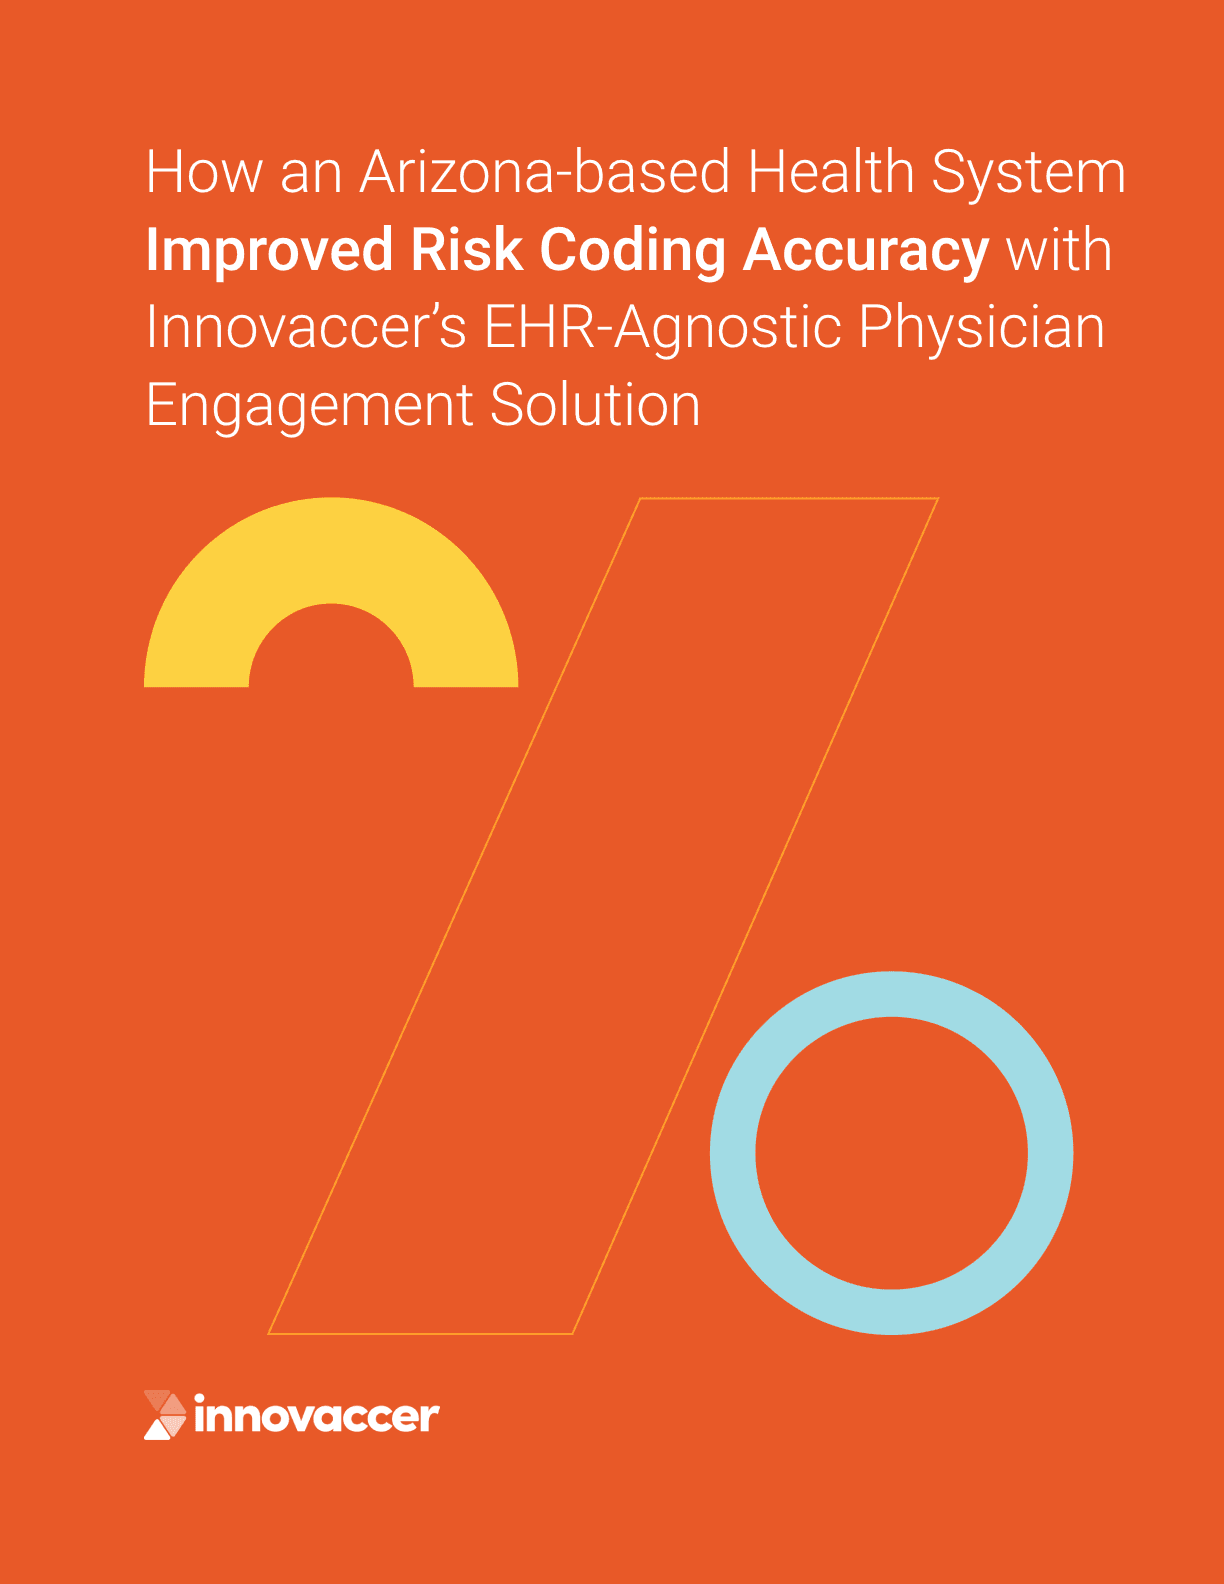 How an Arizona-Based Health System Improved Risk Coding Accuracy With Innovaccer’s EHR-Agnostic Physician Engagement Solution